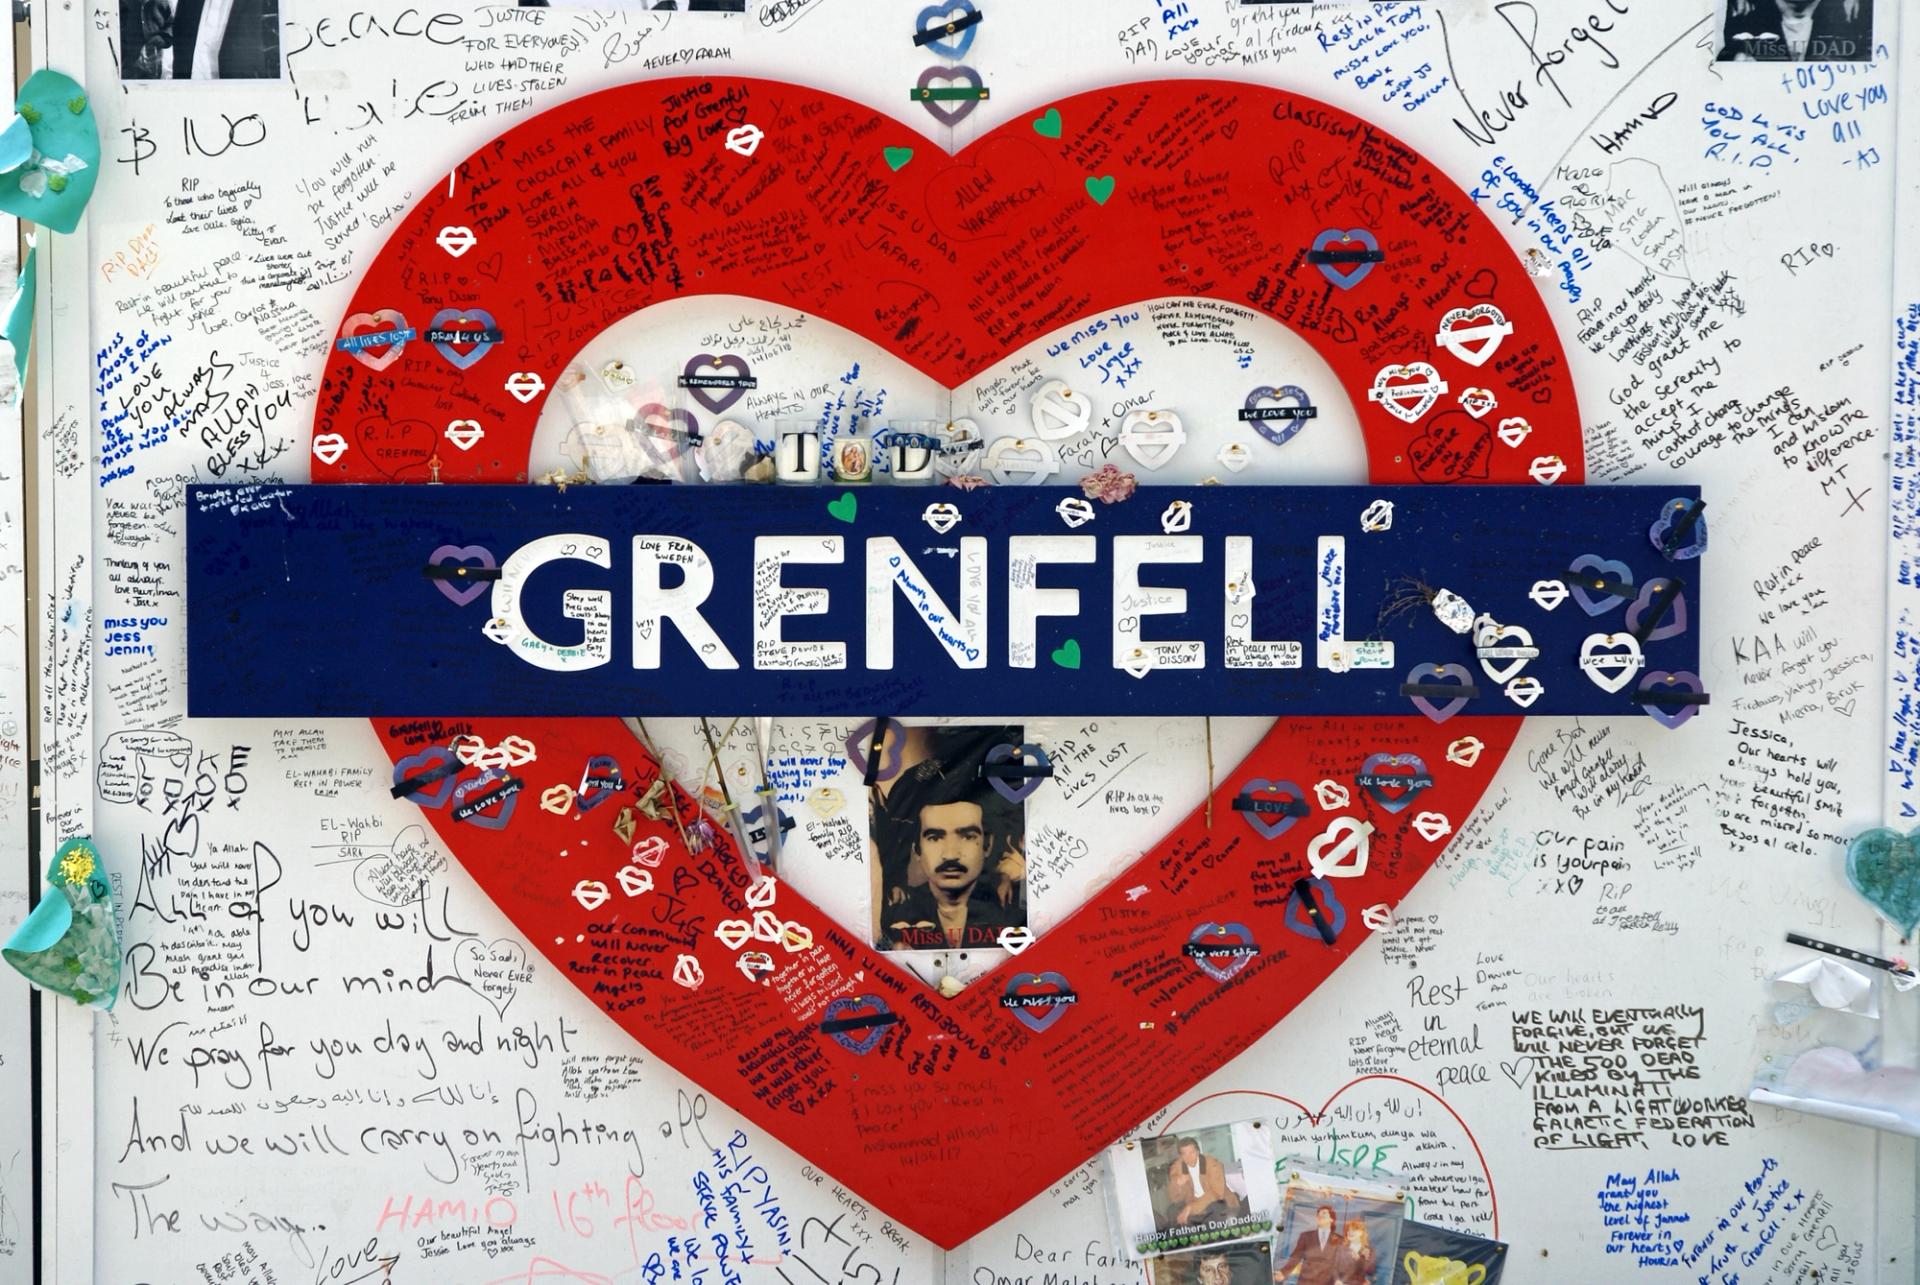 Public mural tribute for the victims of the Grenfell Tower fire disaster.